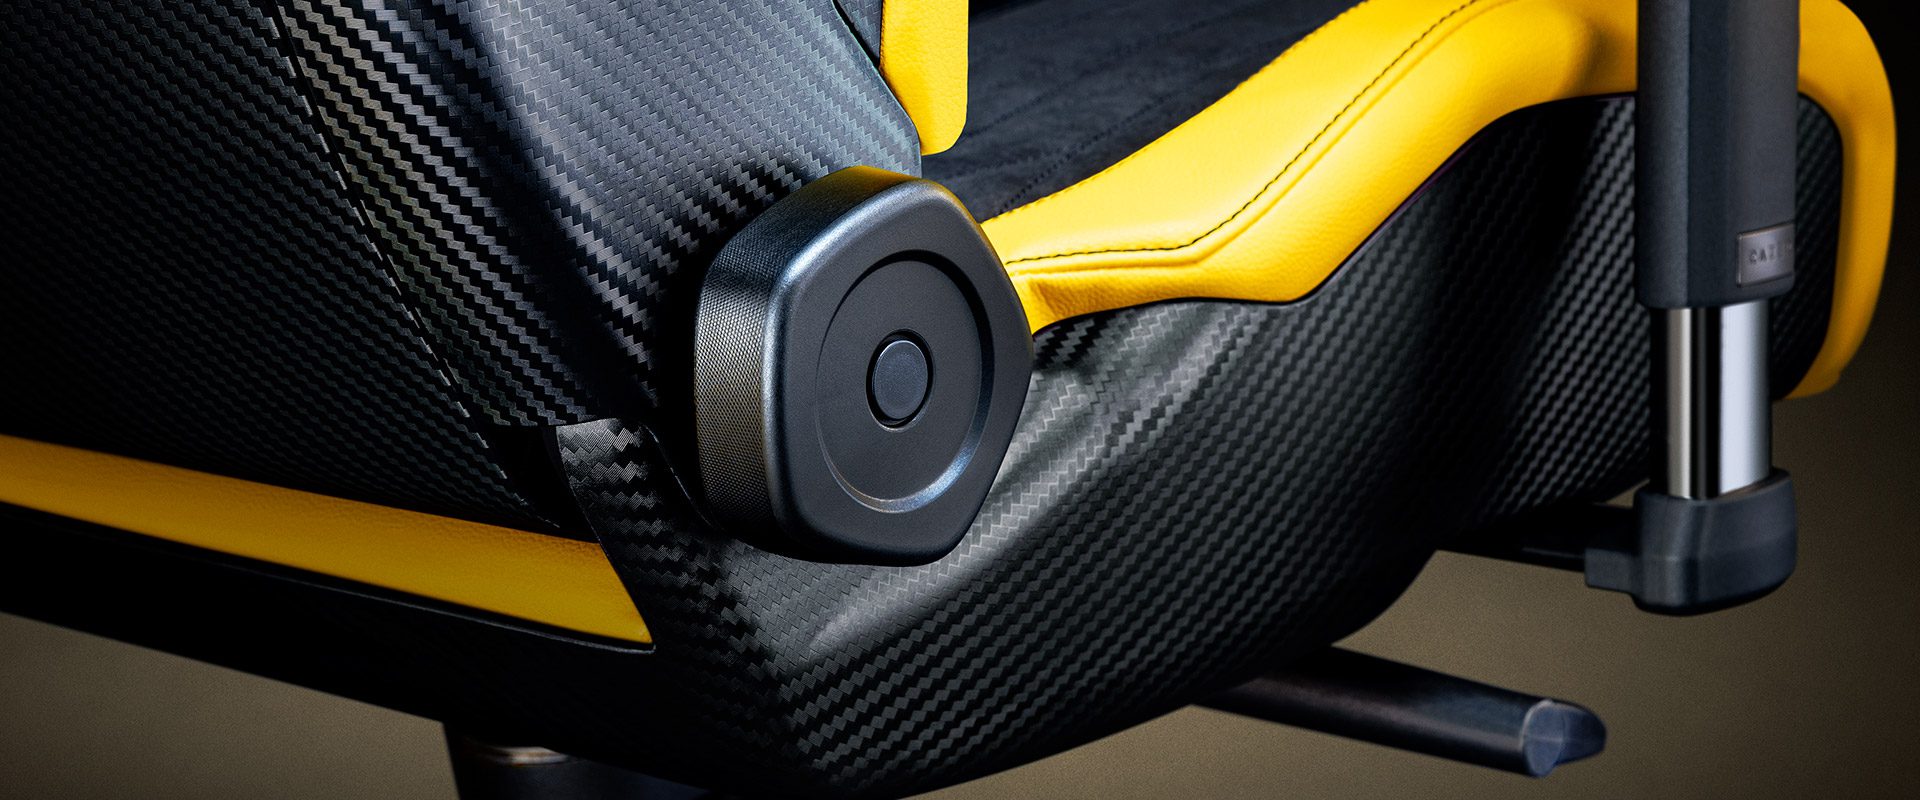 Faux carbon fibre supports on the Razer Enki Koenigsegg special edition gaming chair